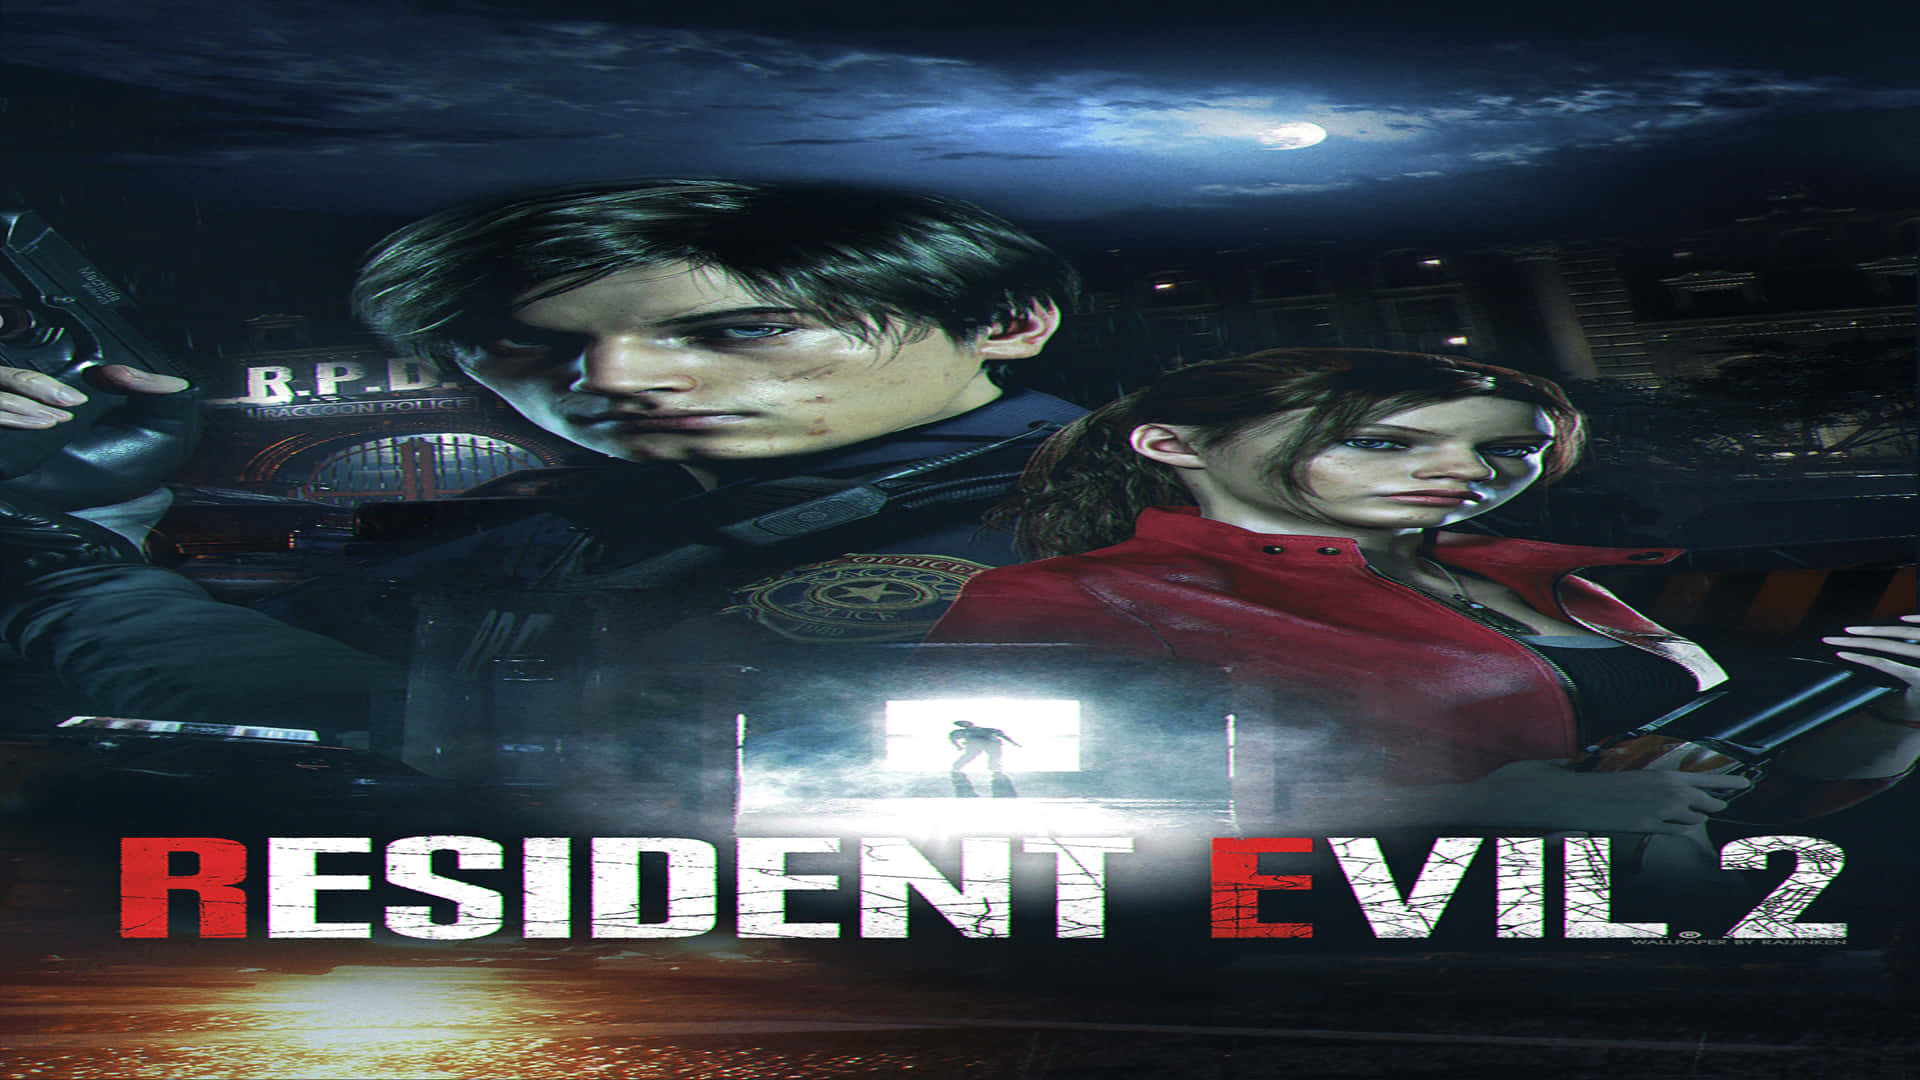 1920x1080 Resident Evil 2 Background Game Poster With Main Characters